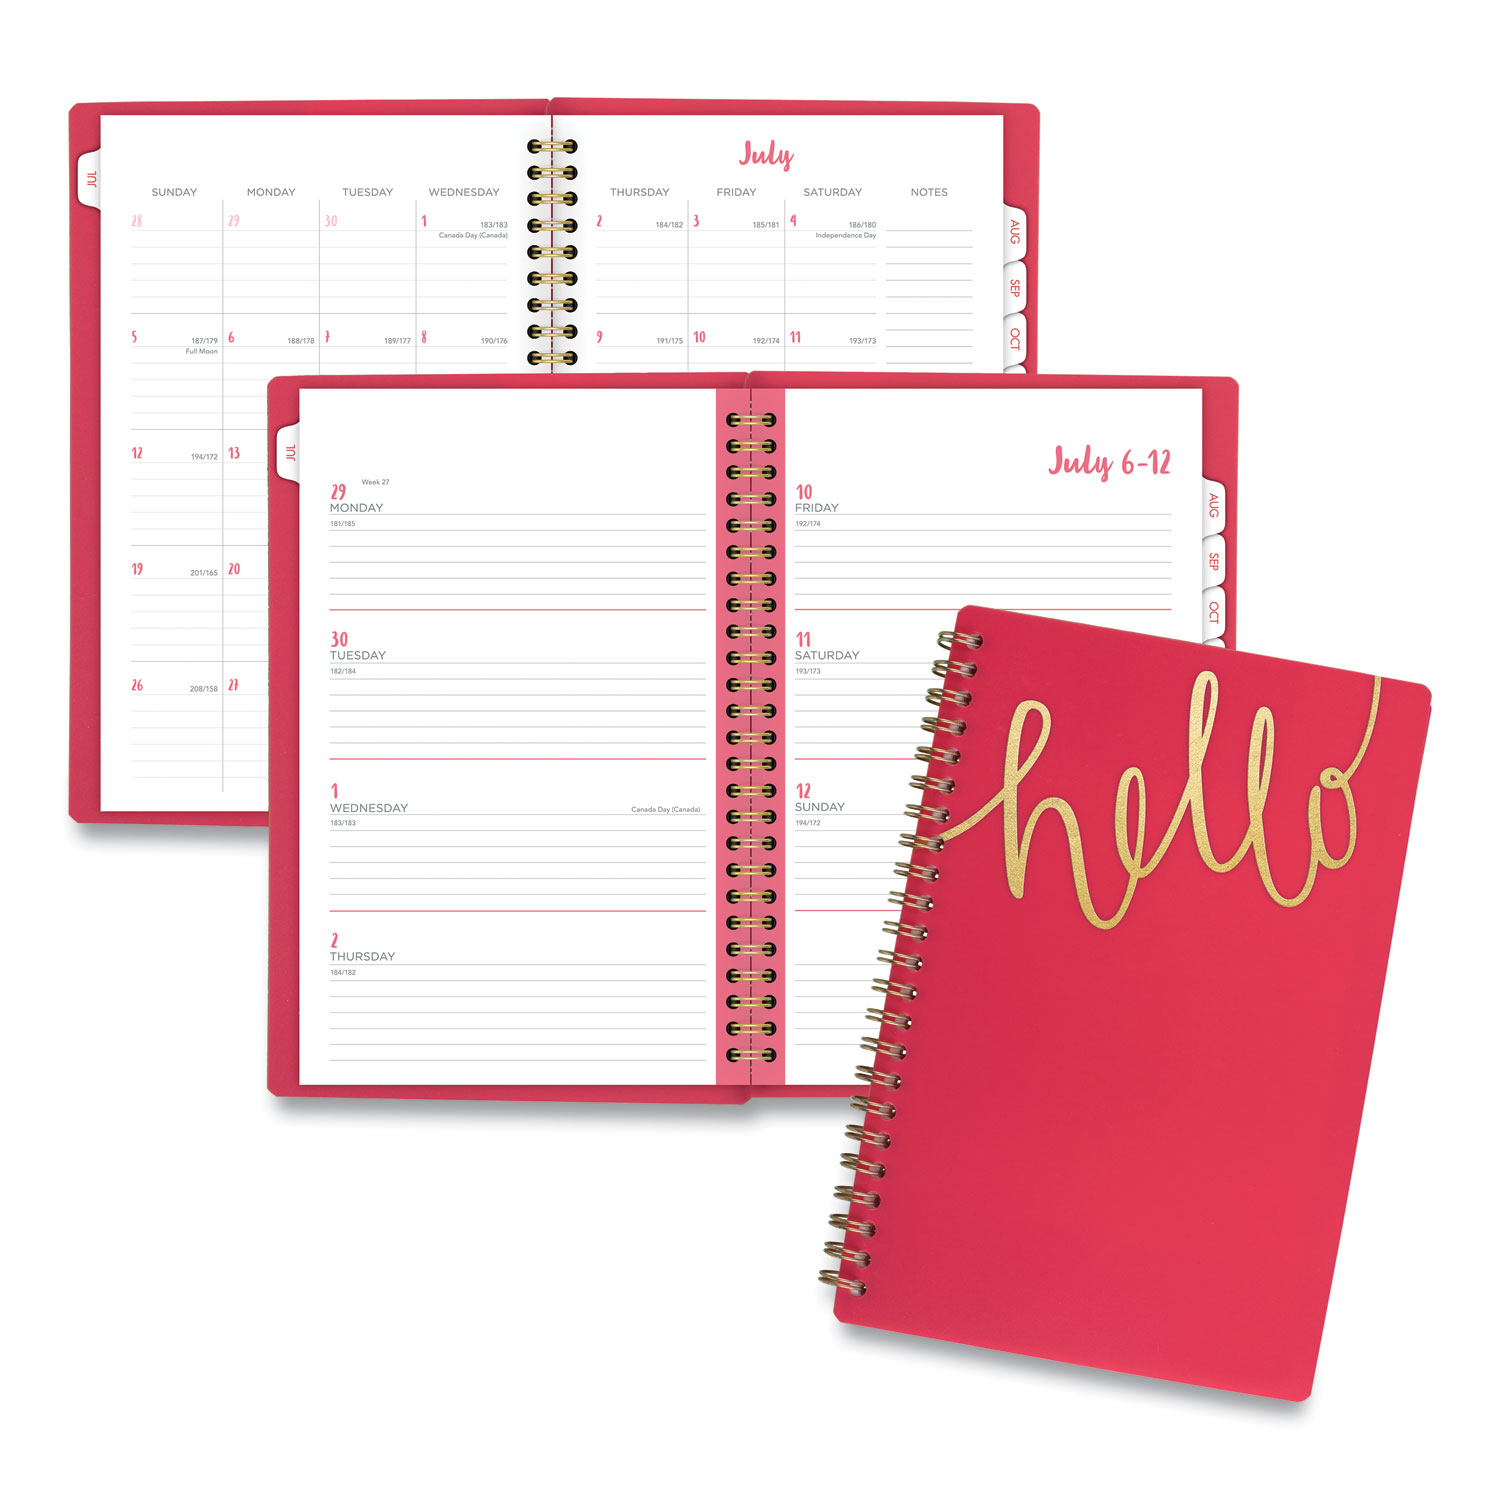  Cambridge 102220027 Aspire Weekly/Monthly Planner, 8 x 4 7/8, Coral, 2020 (AAG102220027) 